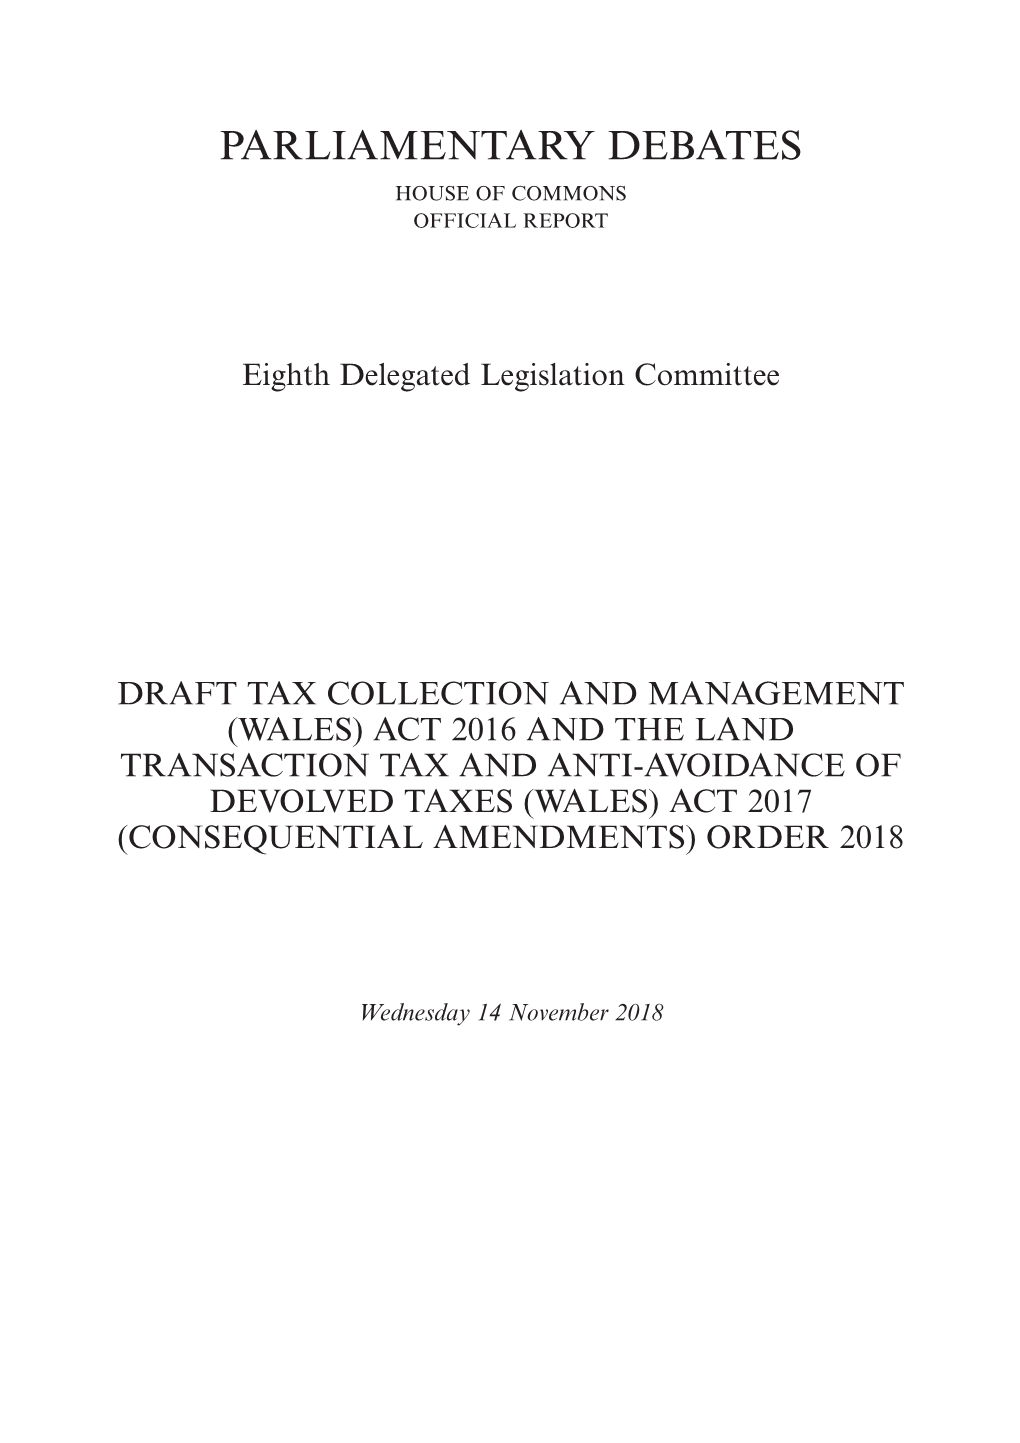 Draft Tax Collection and Management